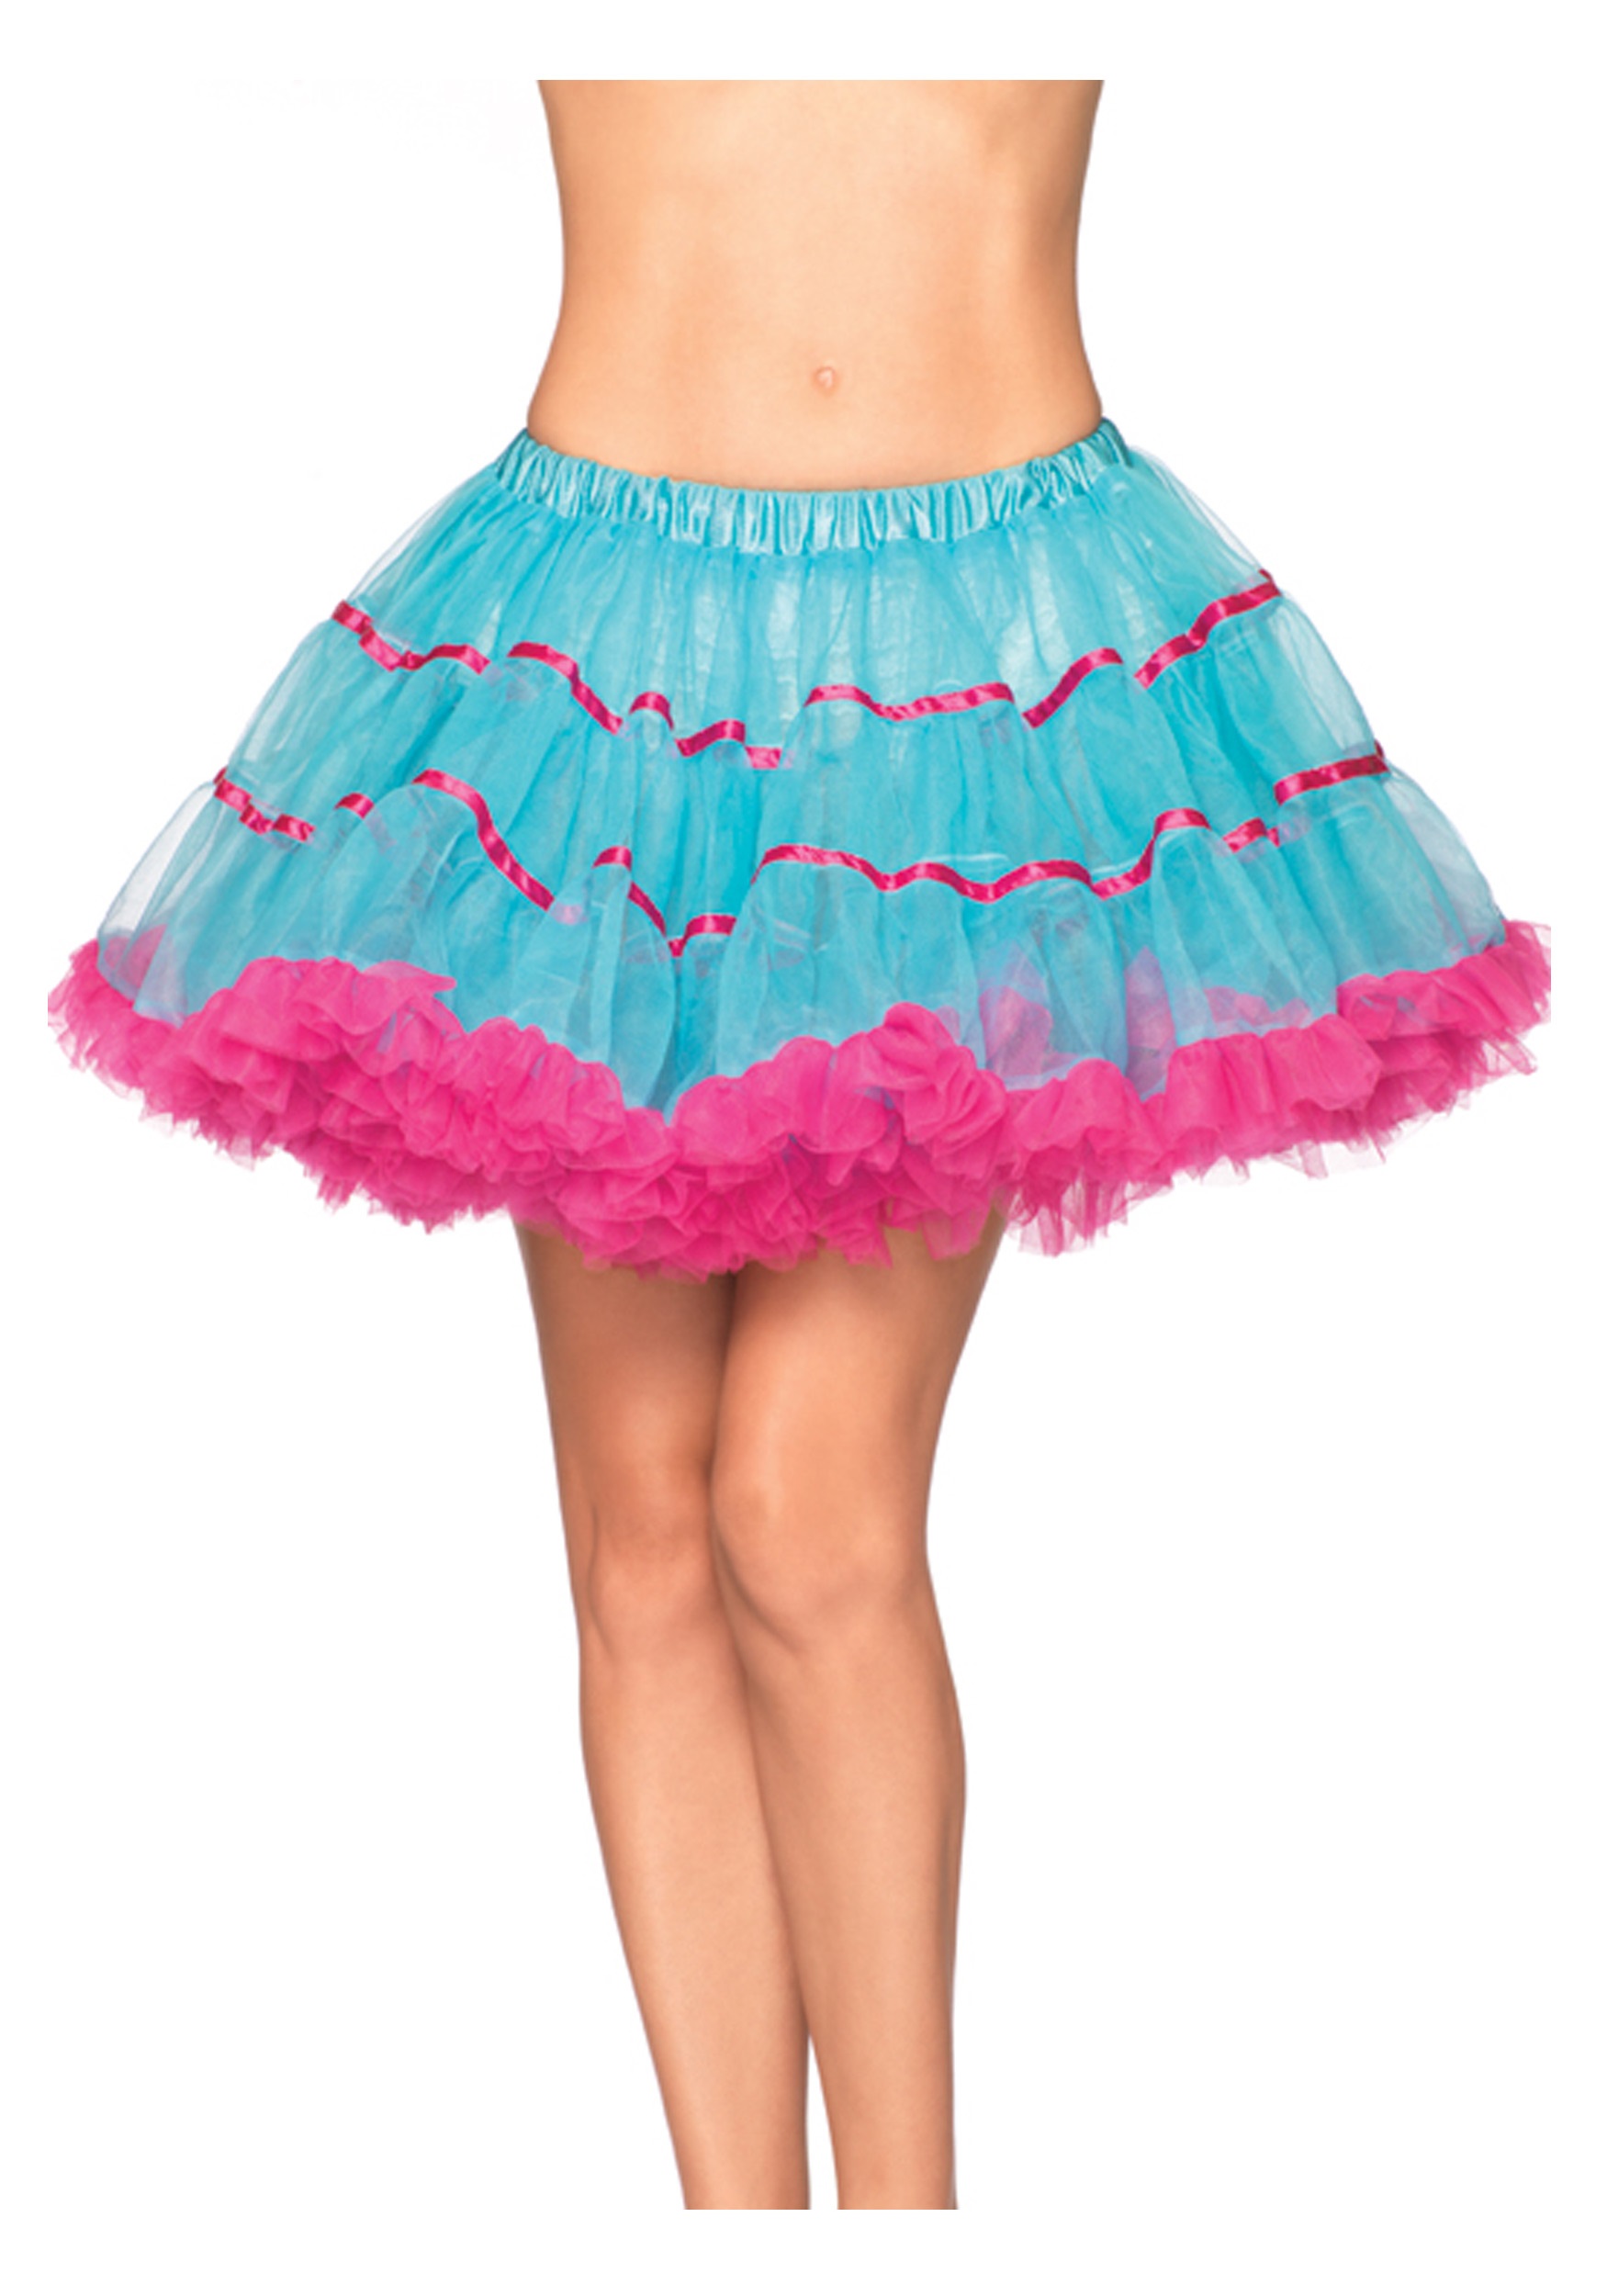 Women's Turquoise And Neon Pink Petticoat